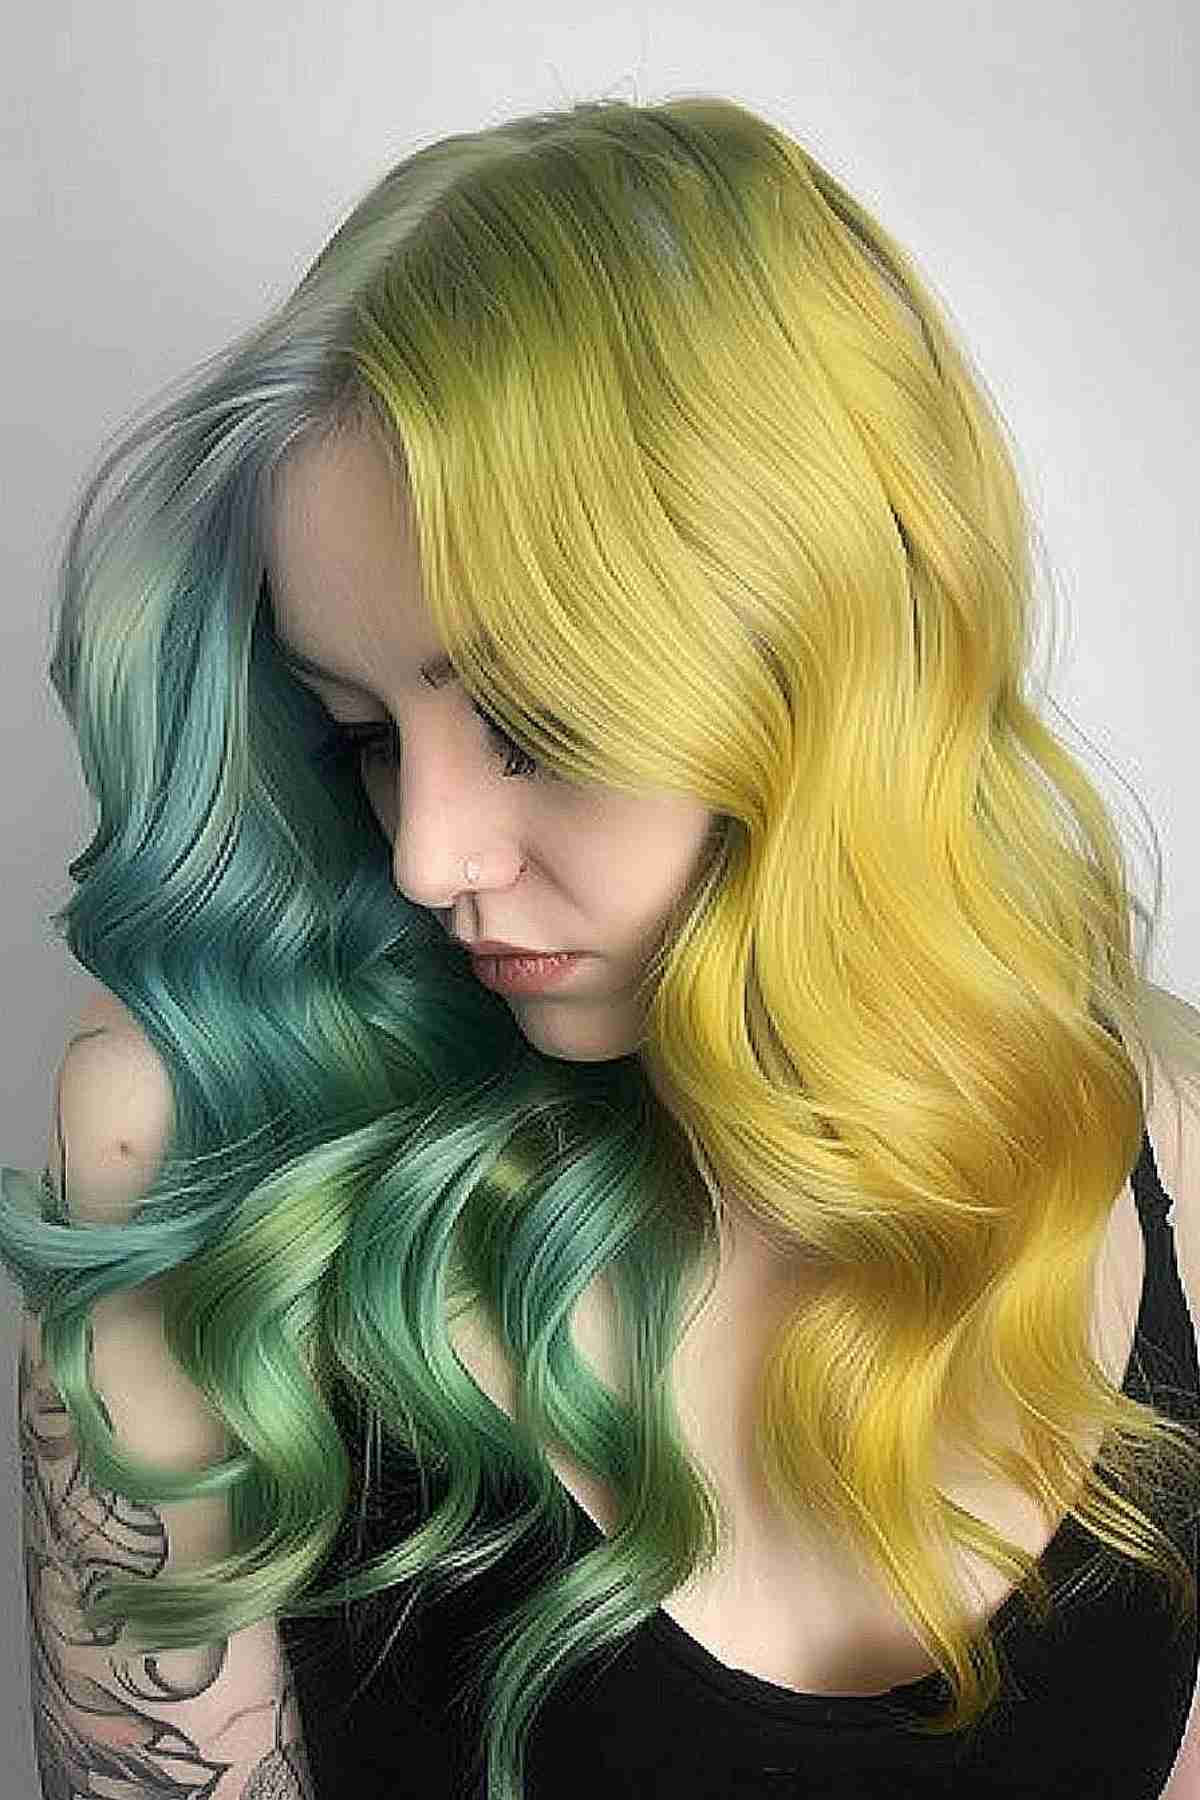 Long wavy hair with split-dye from sunny yellow to aqua green, evoking a spring-into-summer transition